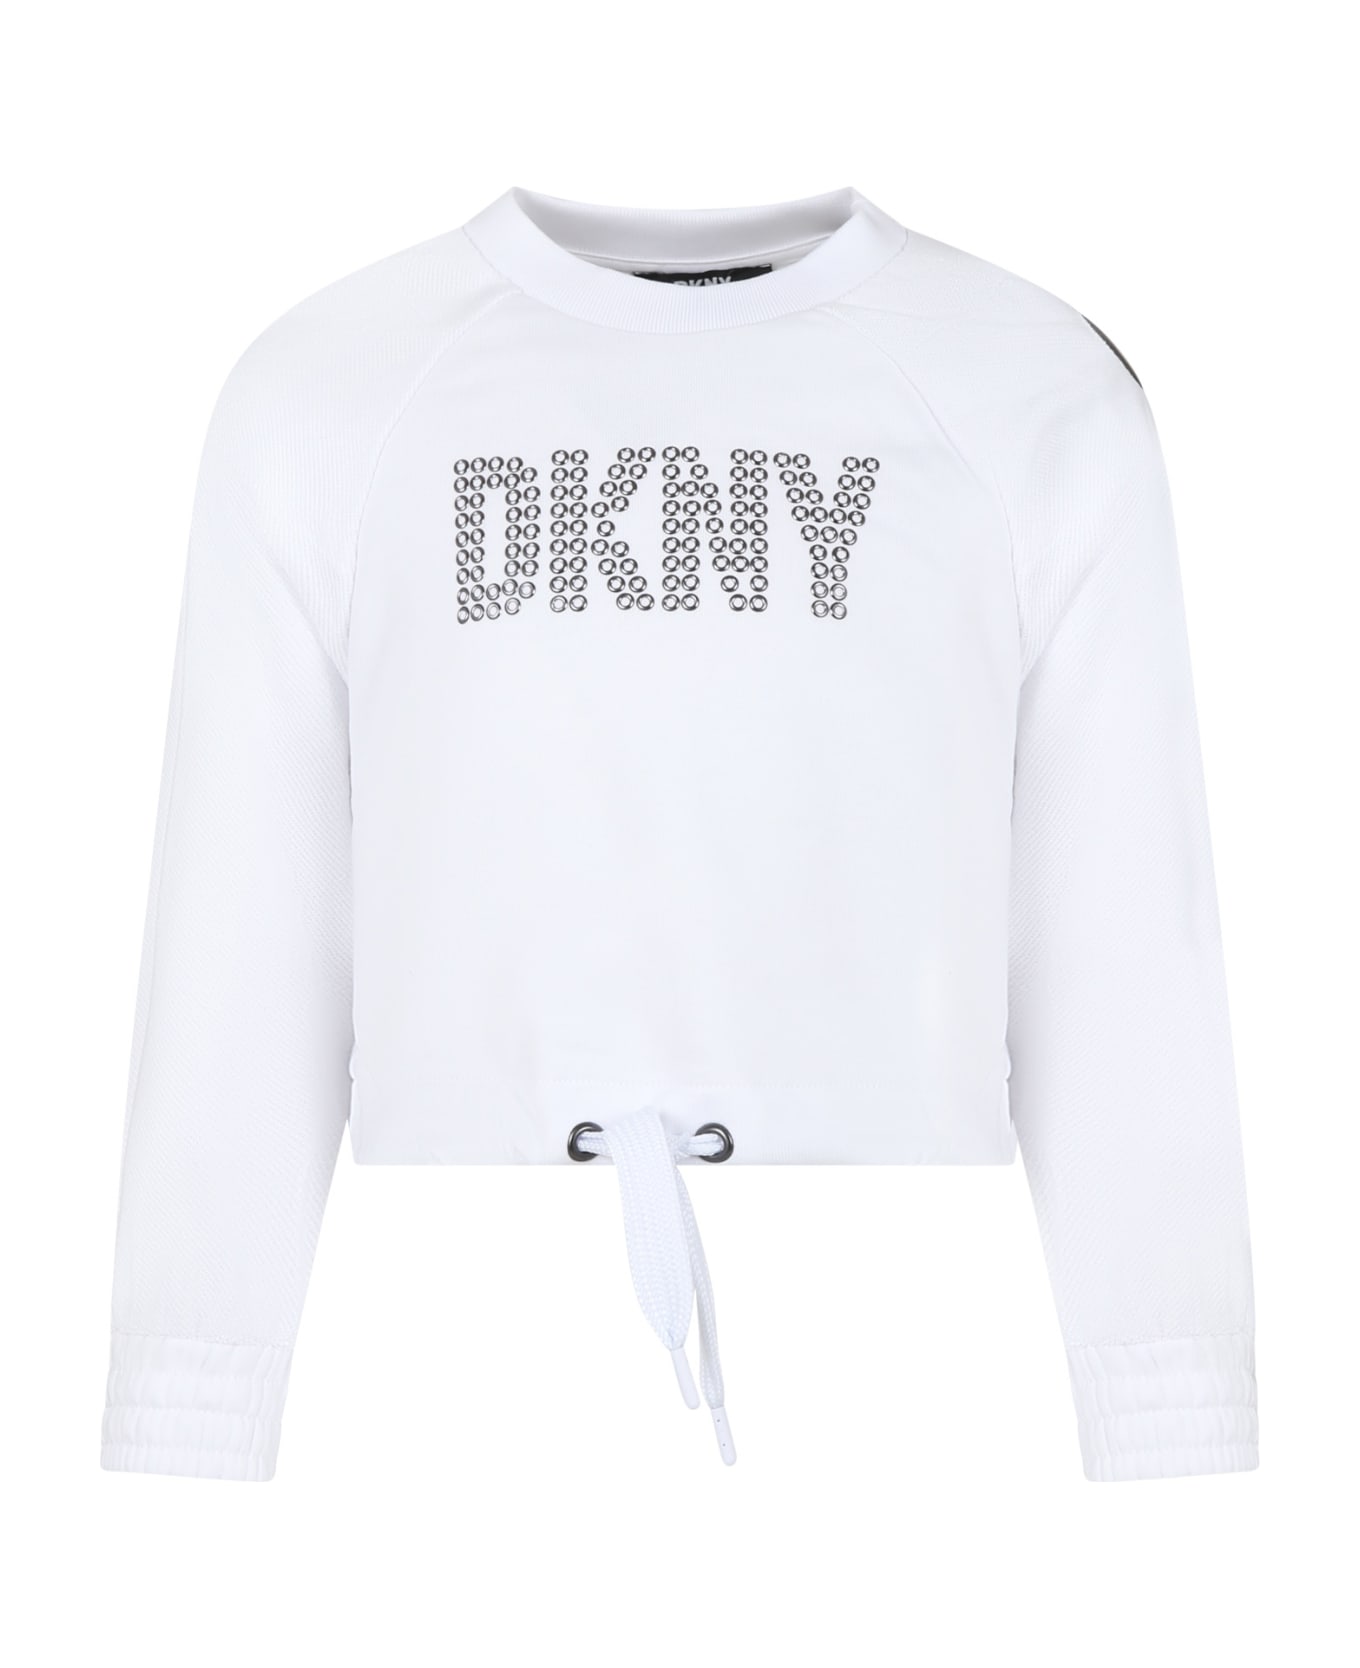 DKNY White Cropped Sweatshirt For Girl With Logo - White